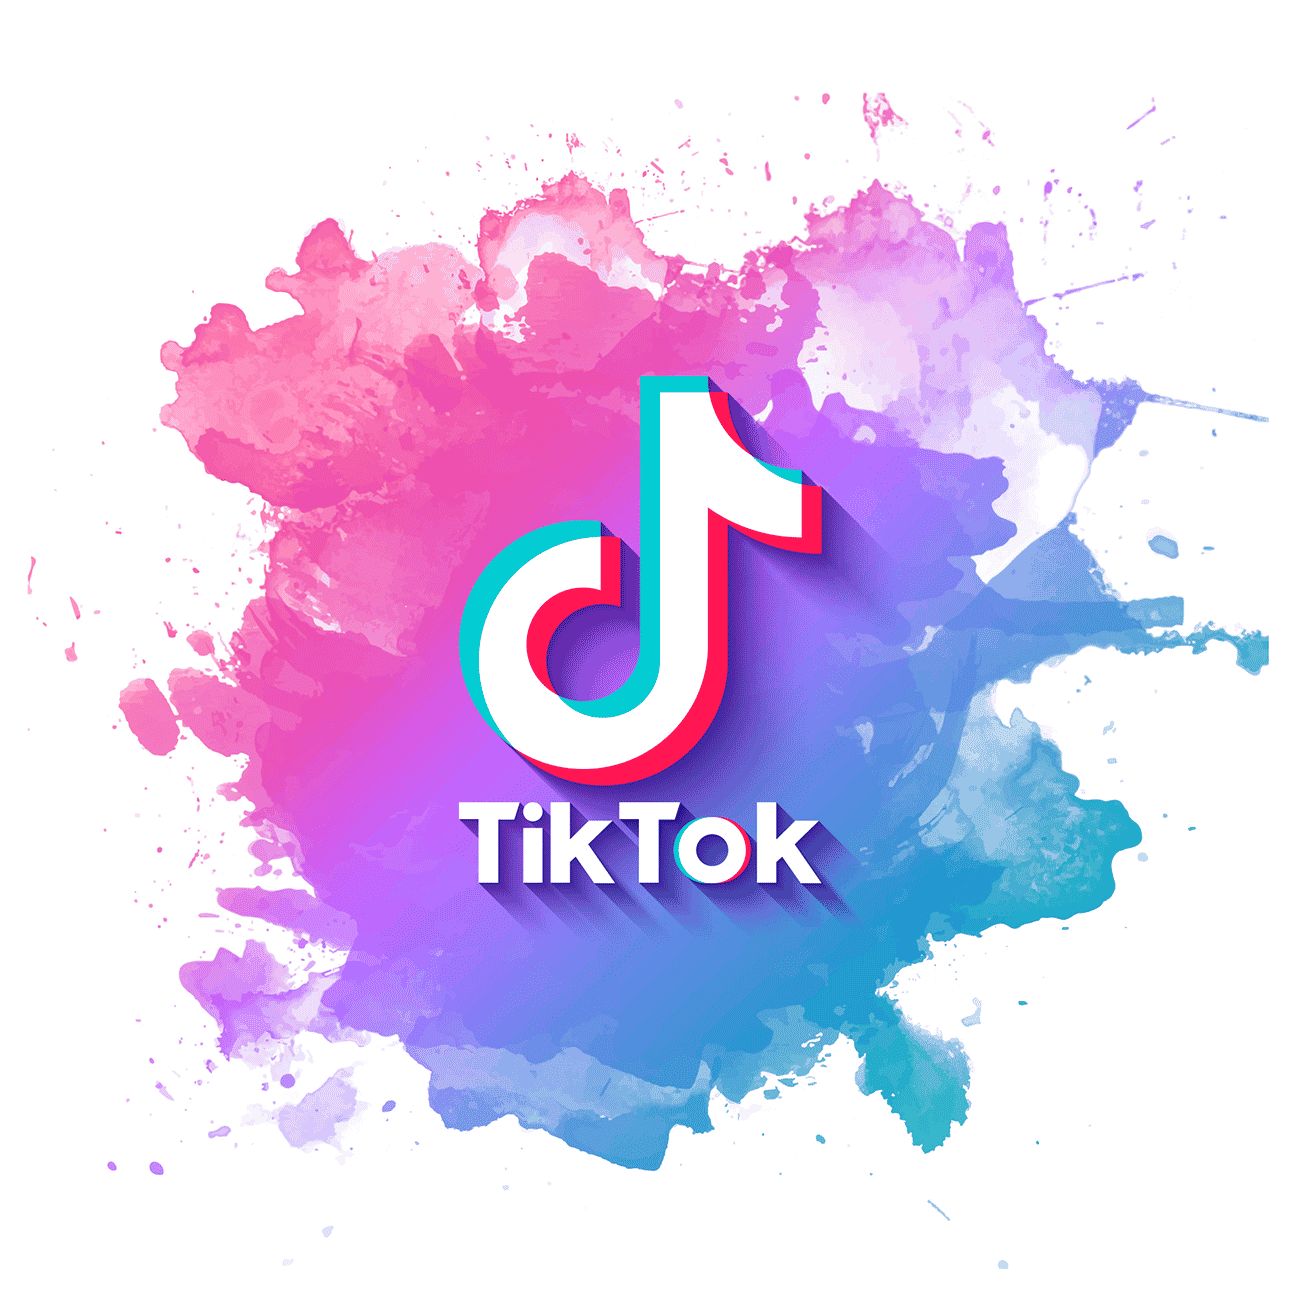 TikTok logo on a pink, blue and purple water colour background.